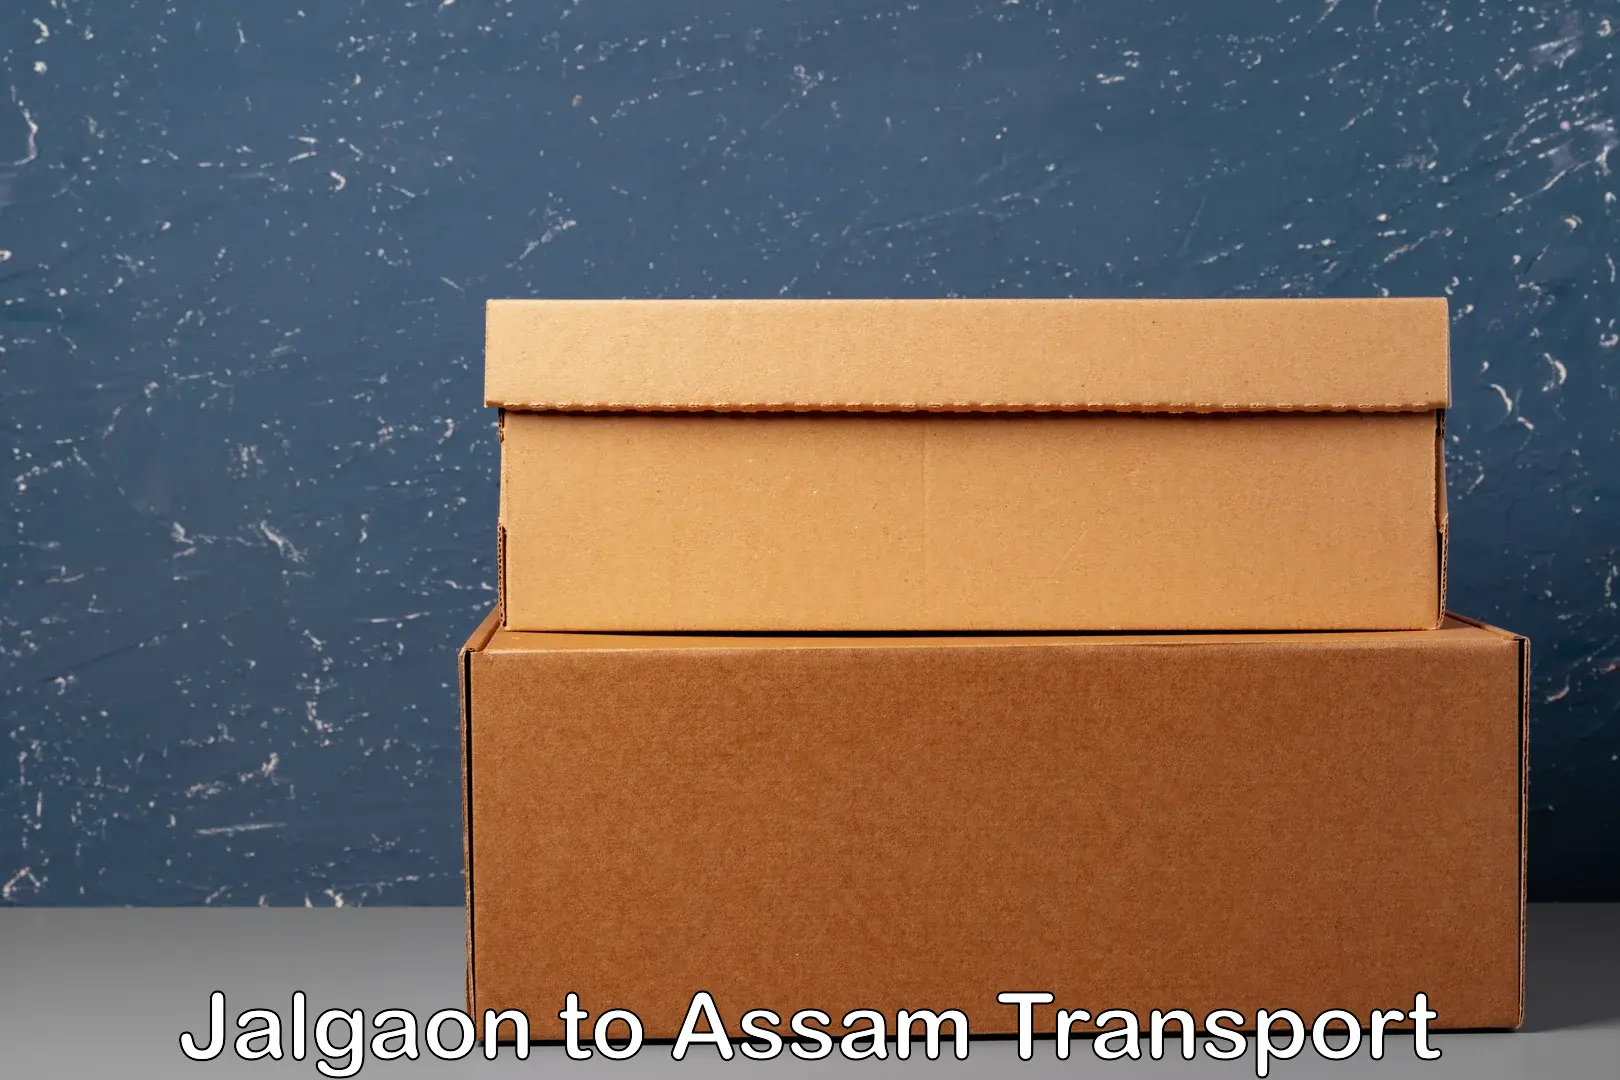 Air freight transport services in Jalgaon to Hailakandi